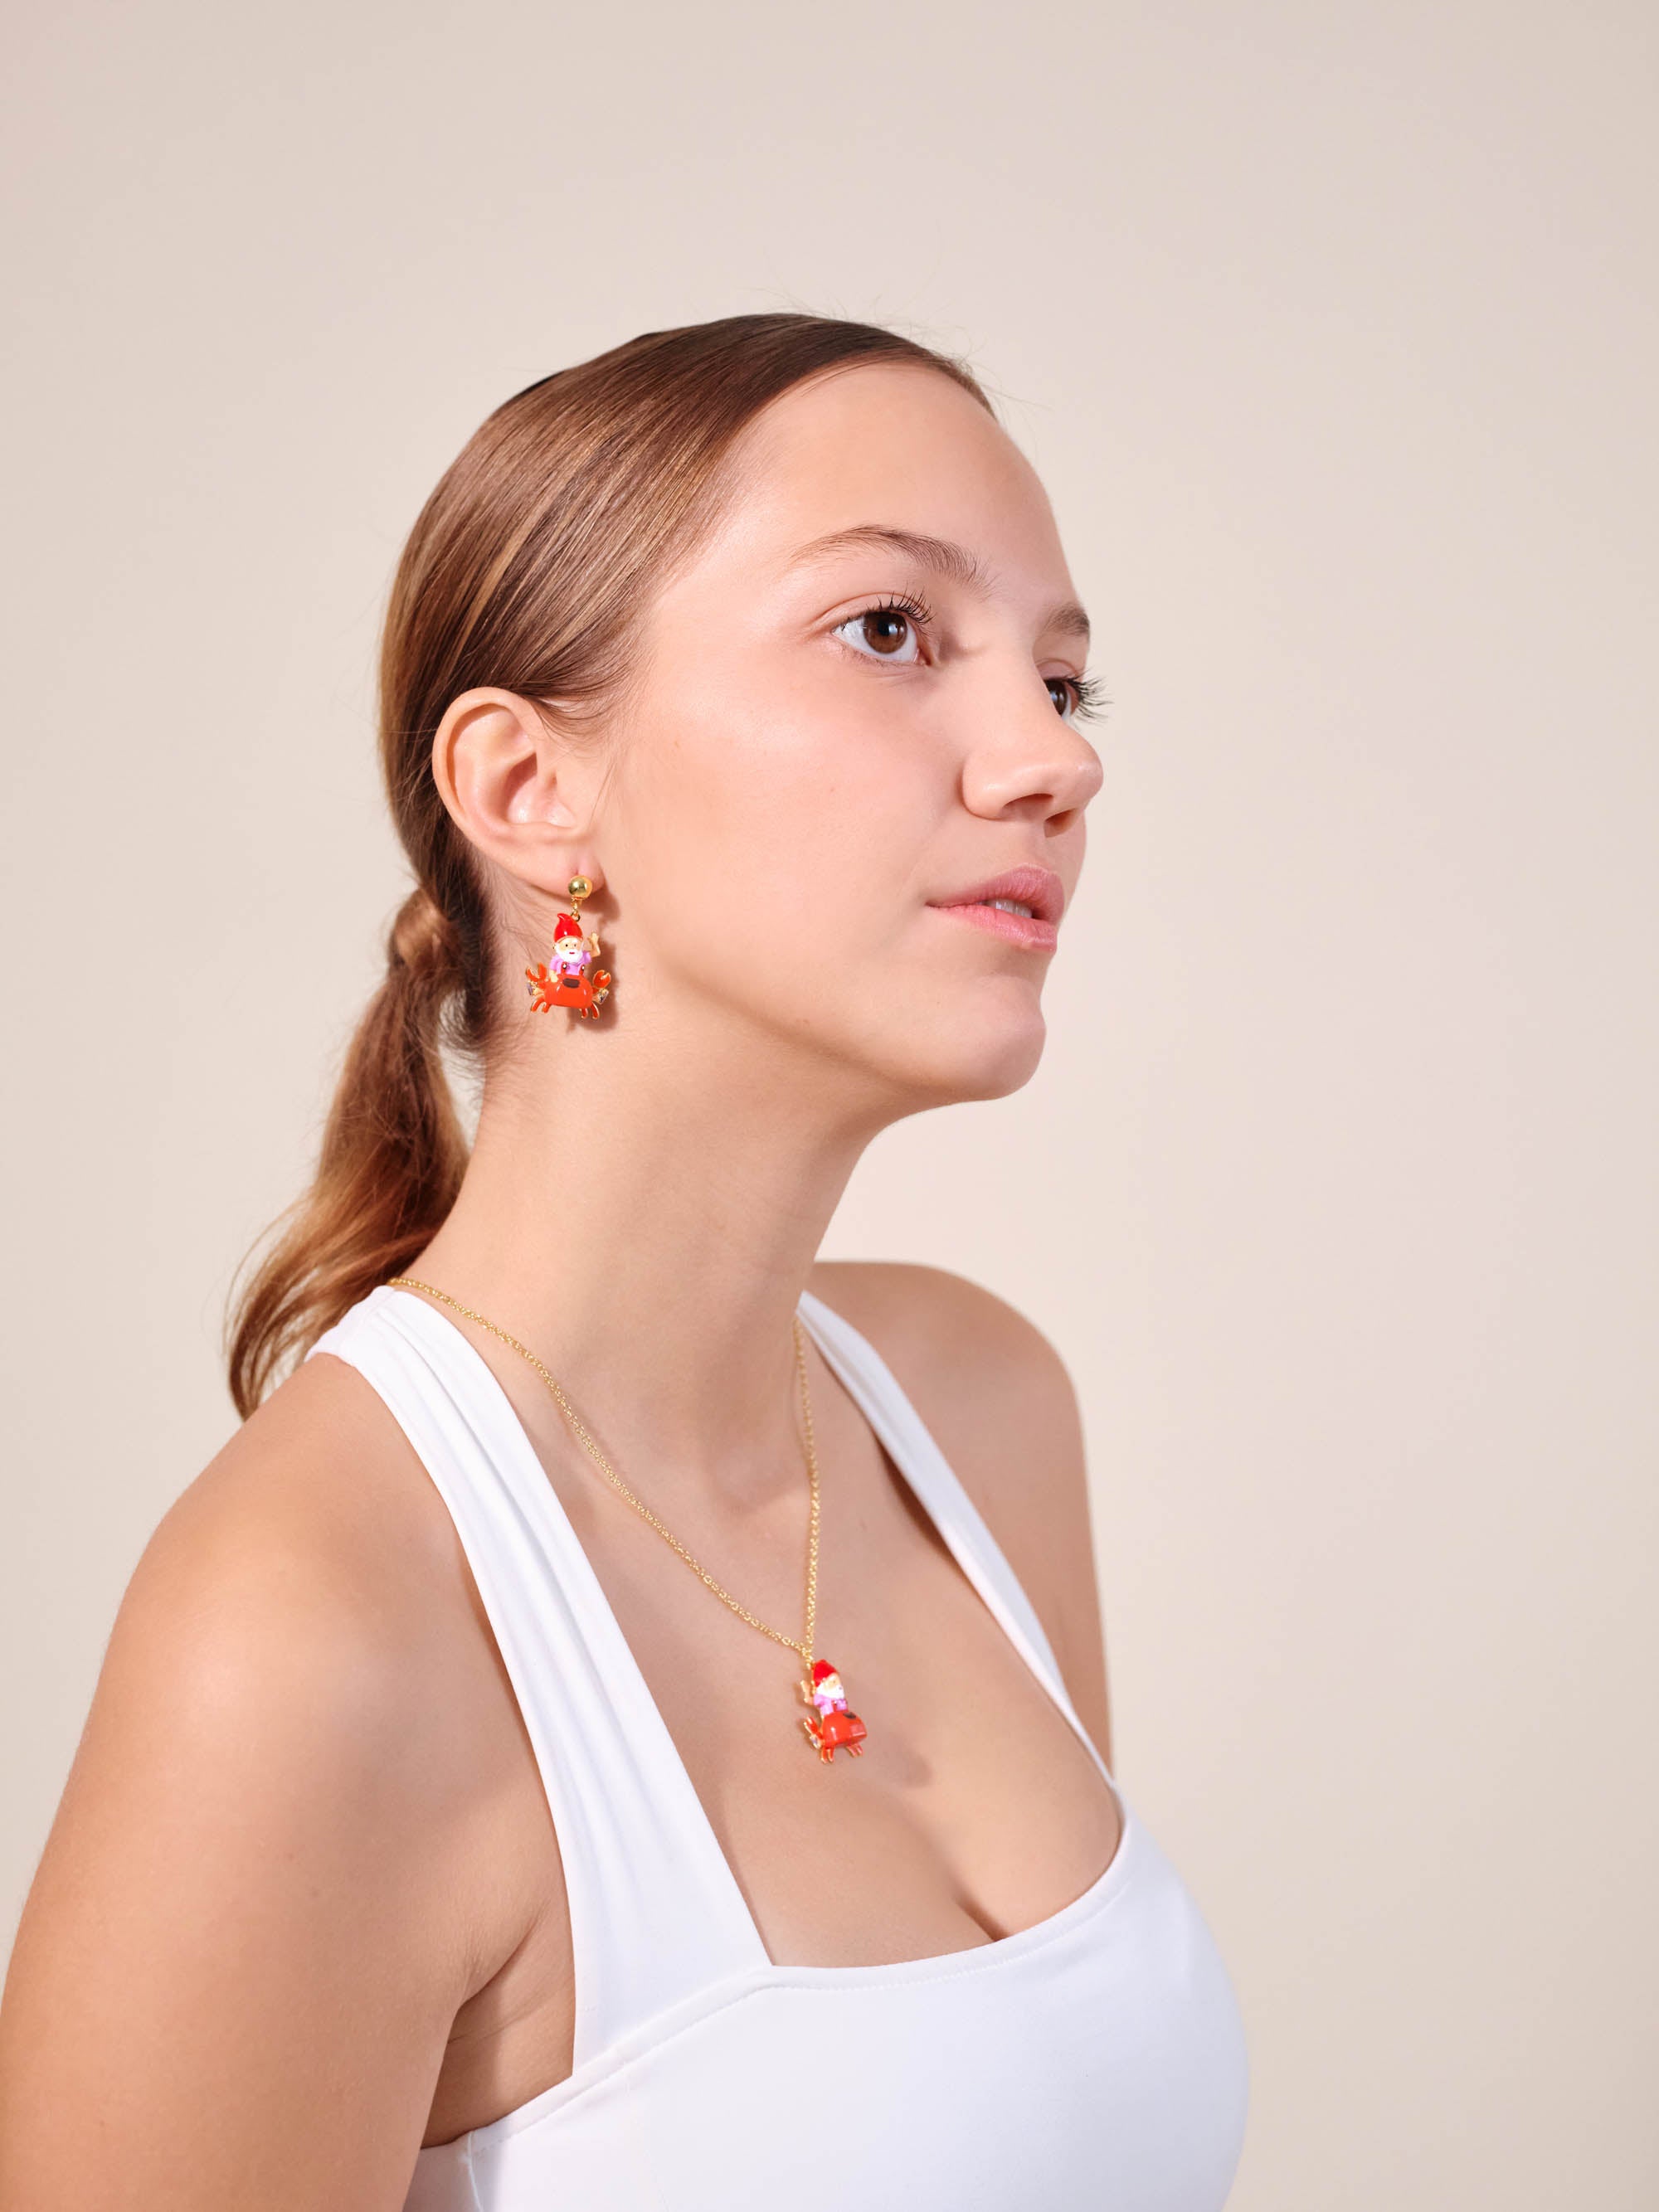 Garden gnome and red crab post earrings